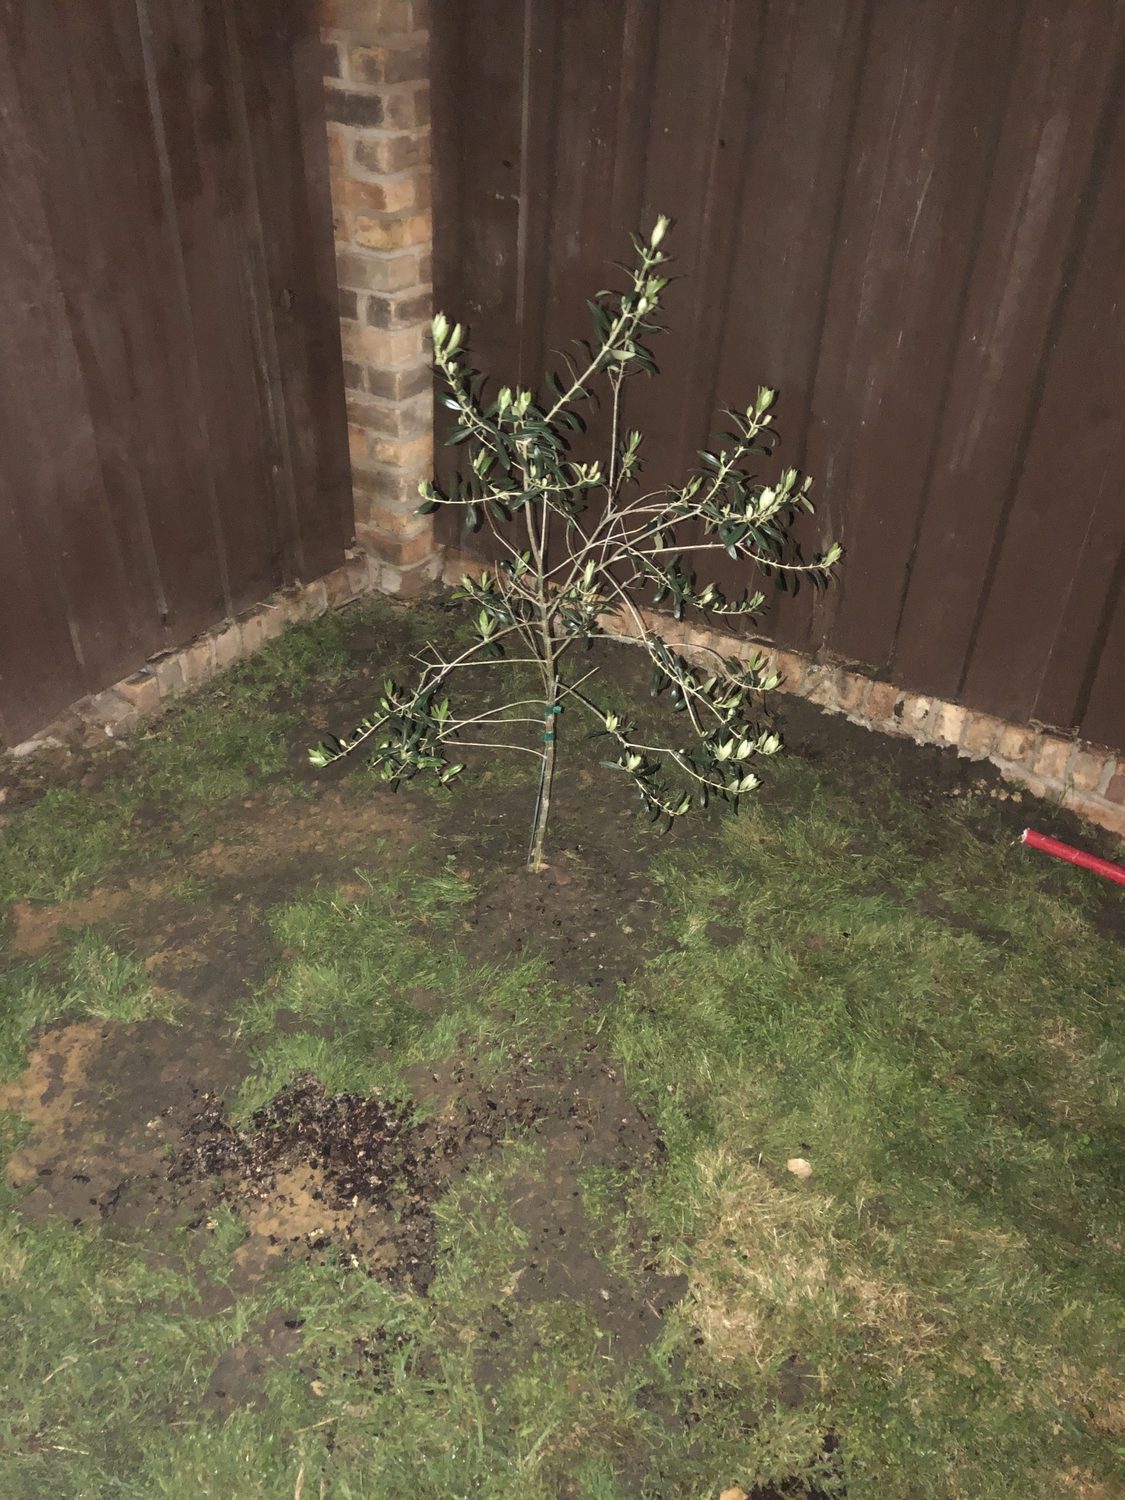 Learn How to Grow Olive Trees in the Home Landscape